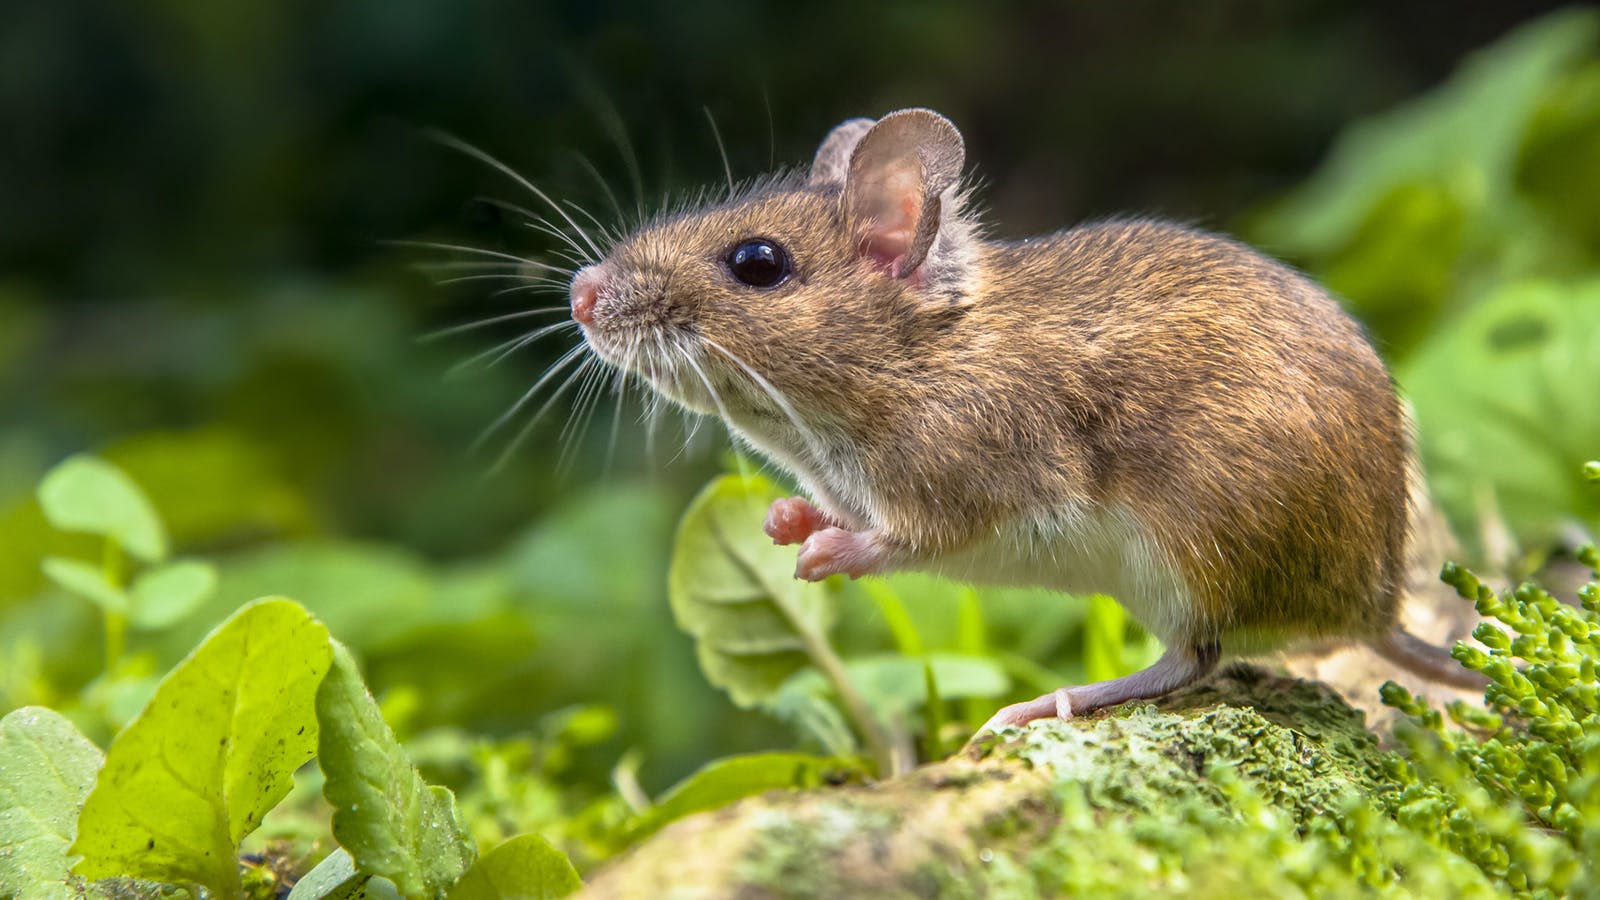 https://www.skedaddlewildlife.com/wp-content/uploads/2020/05/True-or-False_-Answering-these-Common-Mice-Questions.jpg